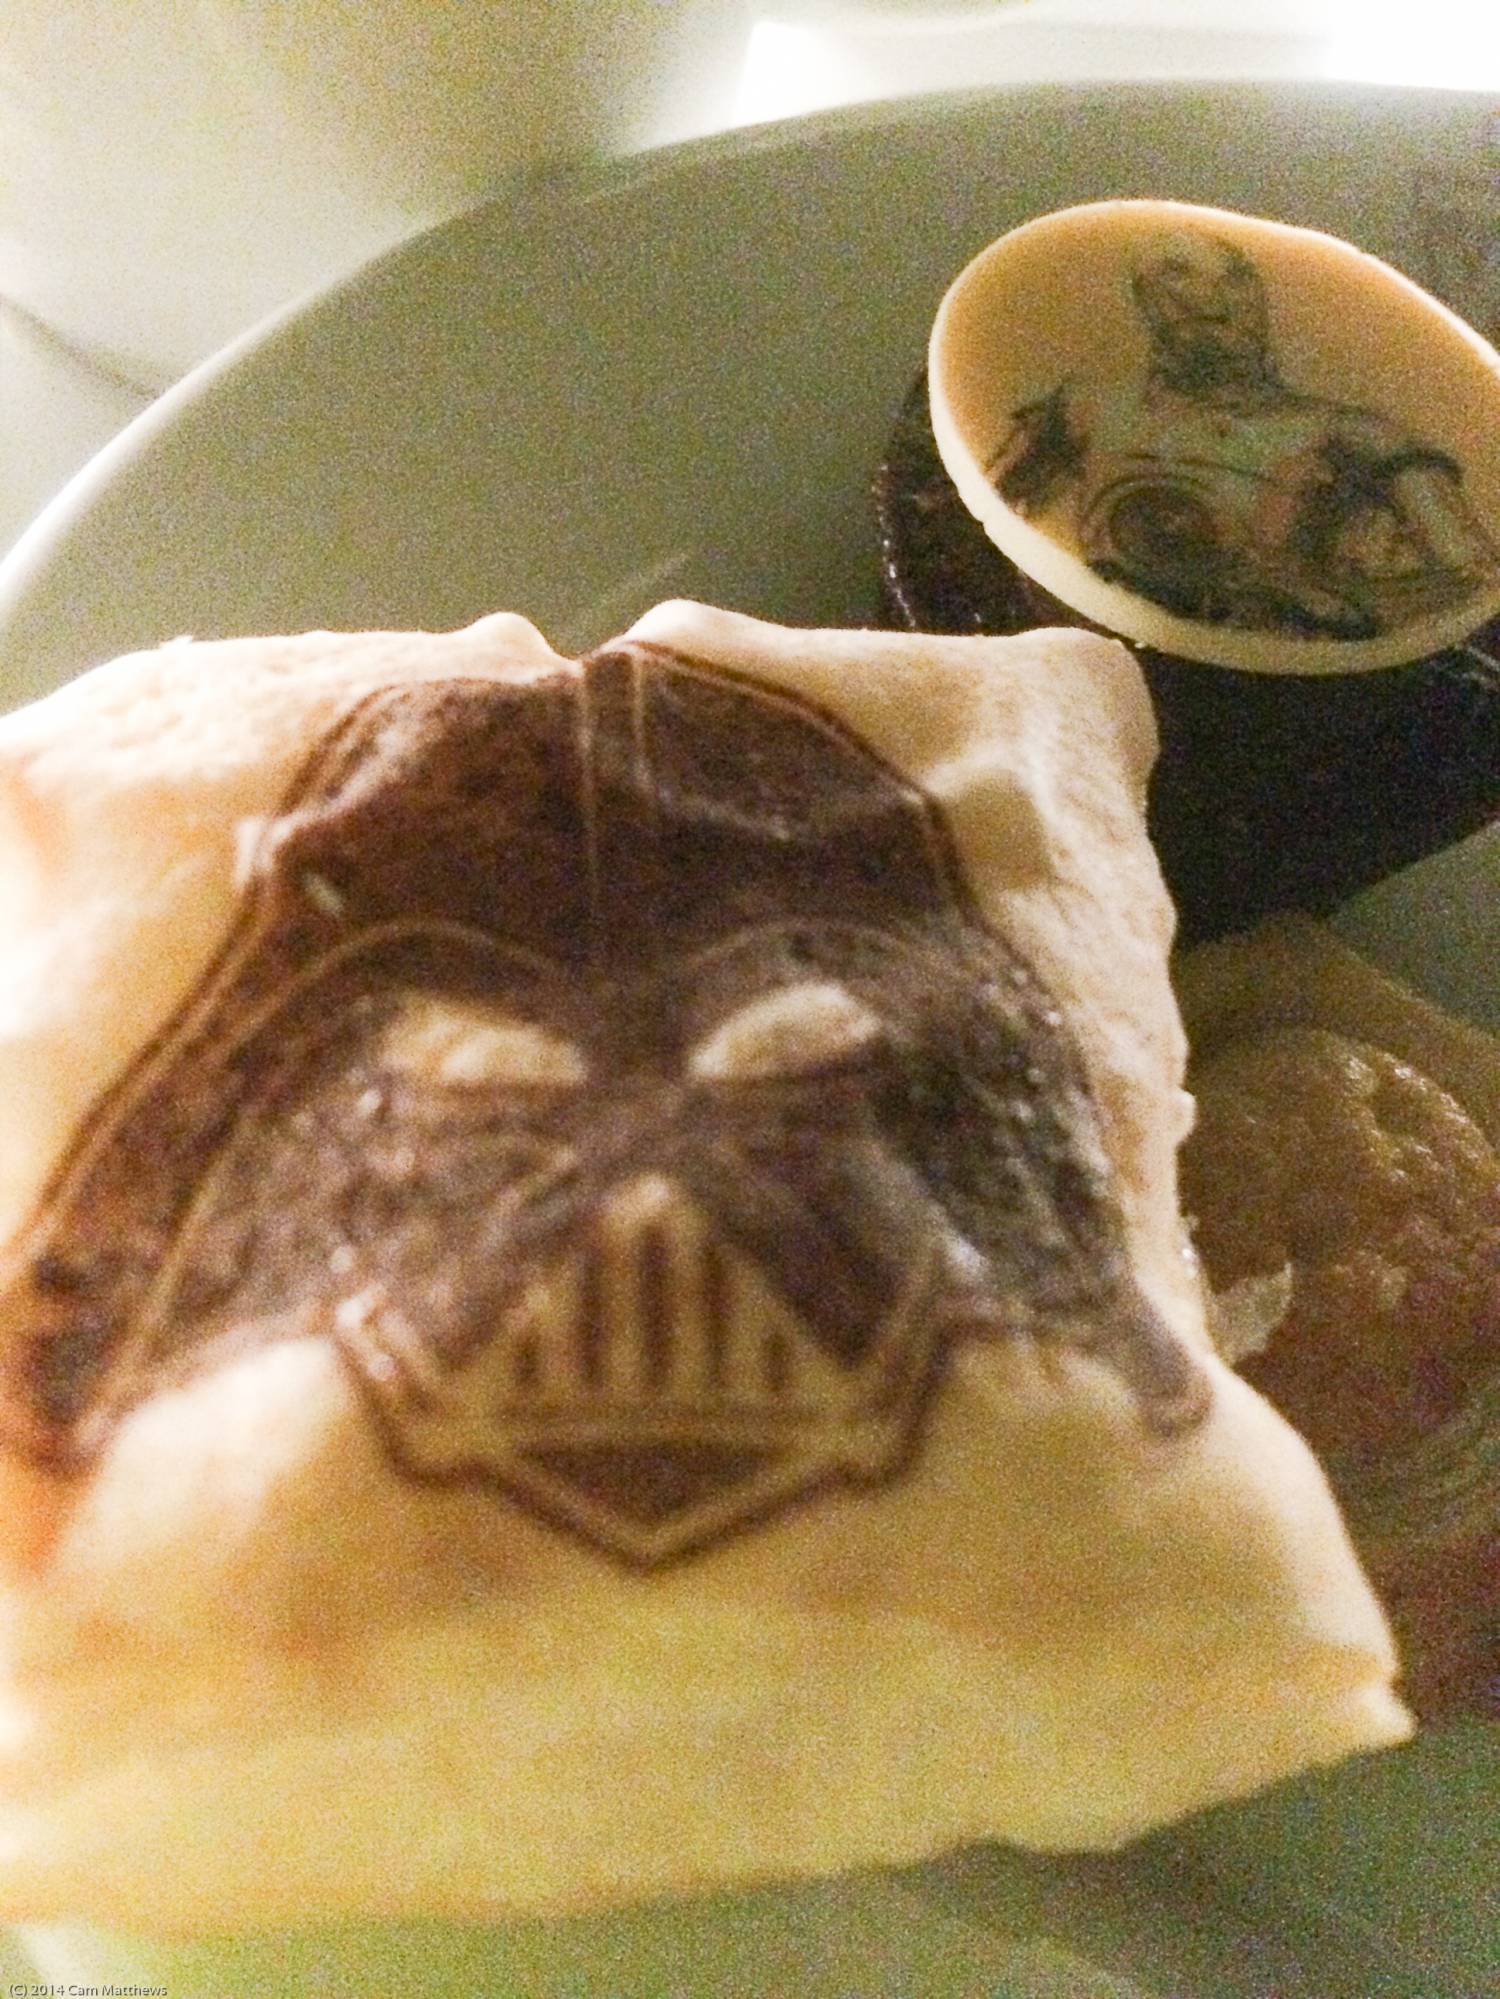 Star Wars Galactic Breakfast 18 Pastries Up Close